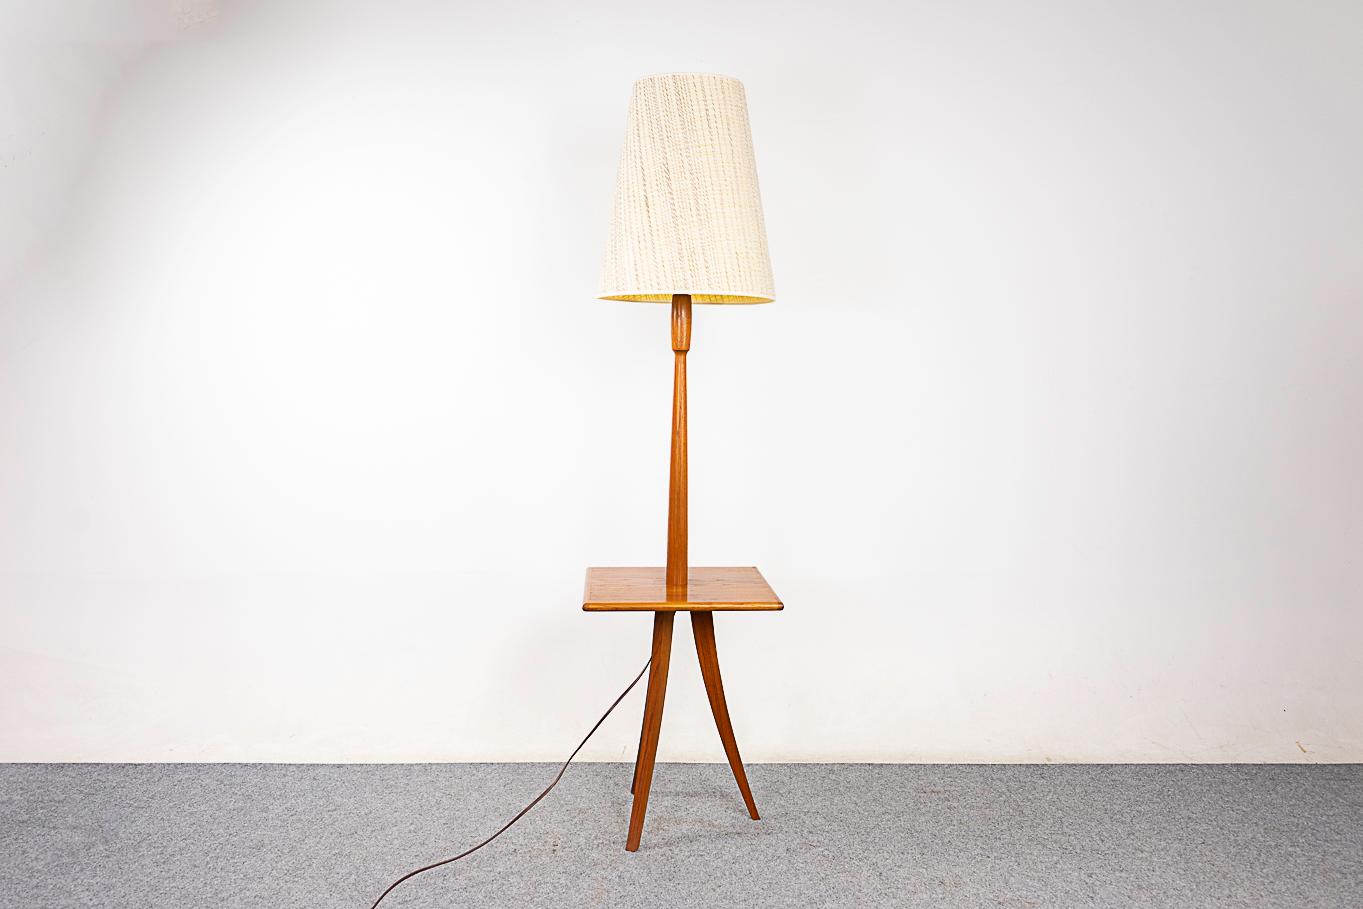 Teak mid-century floor lamp, circa 1960's. Handy built in table with beveled edges and stunning wood graining. Sultry curved legs on this rare tripod design! Lovely bullet shaped detail at the top of the neck. Tri-light socket allows 3 brightness